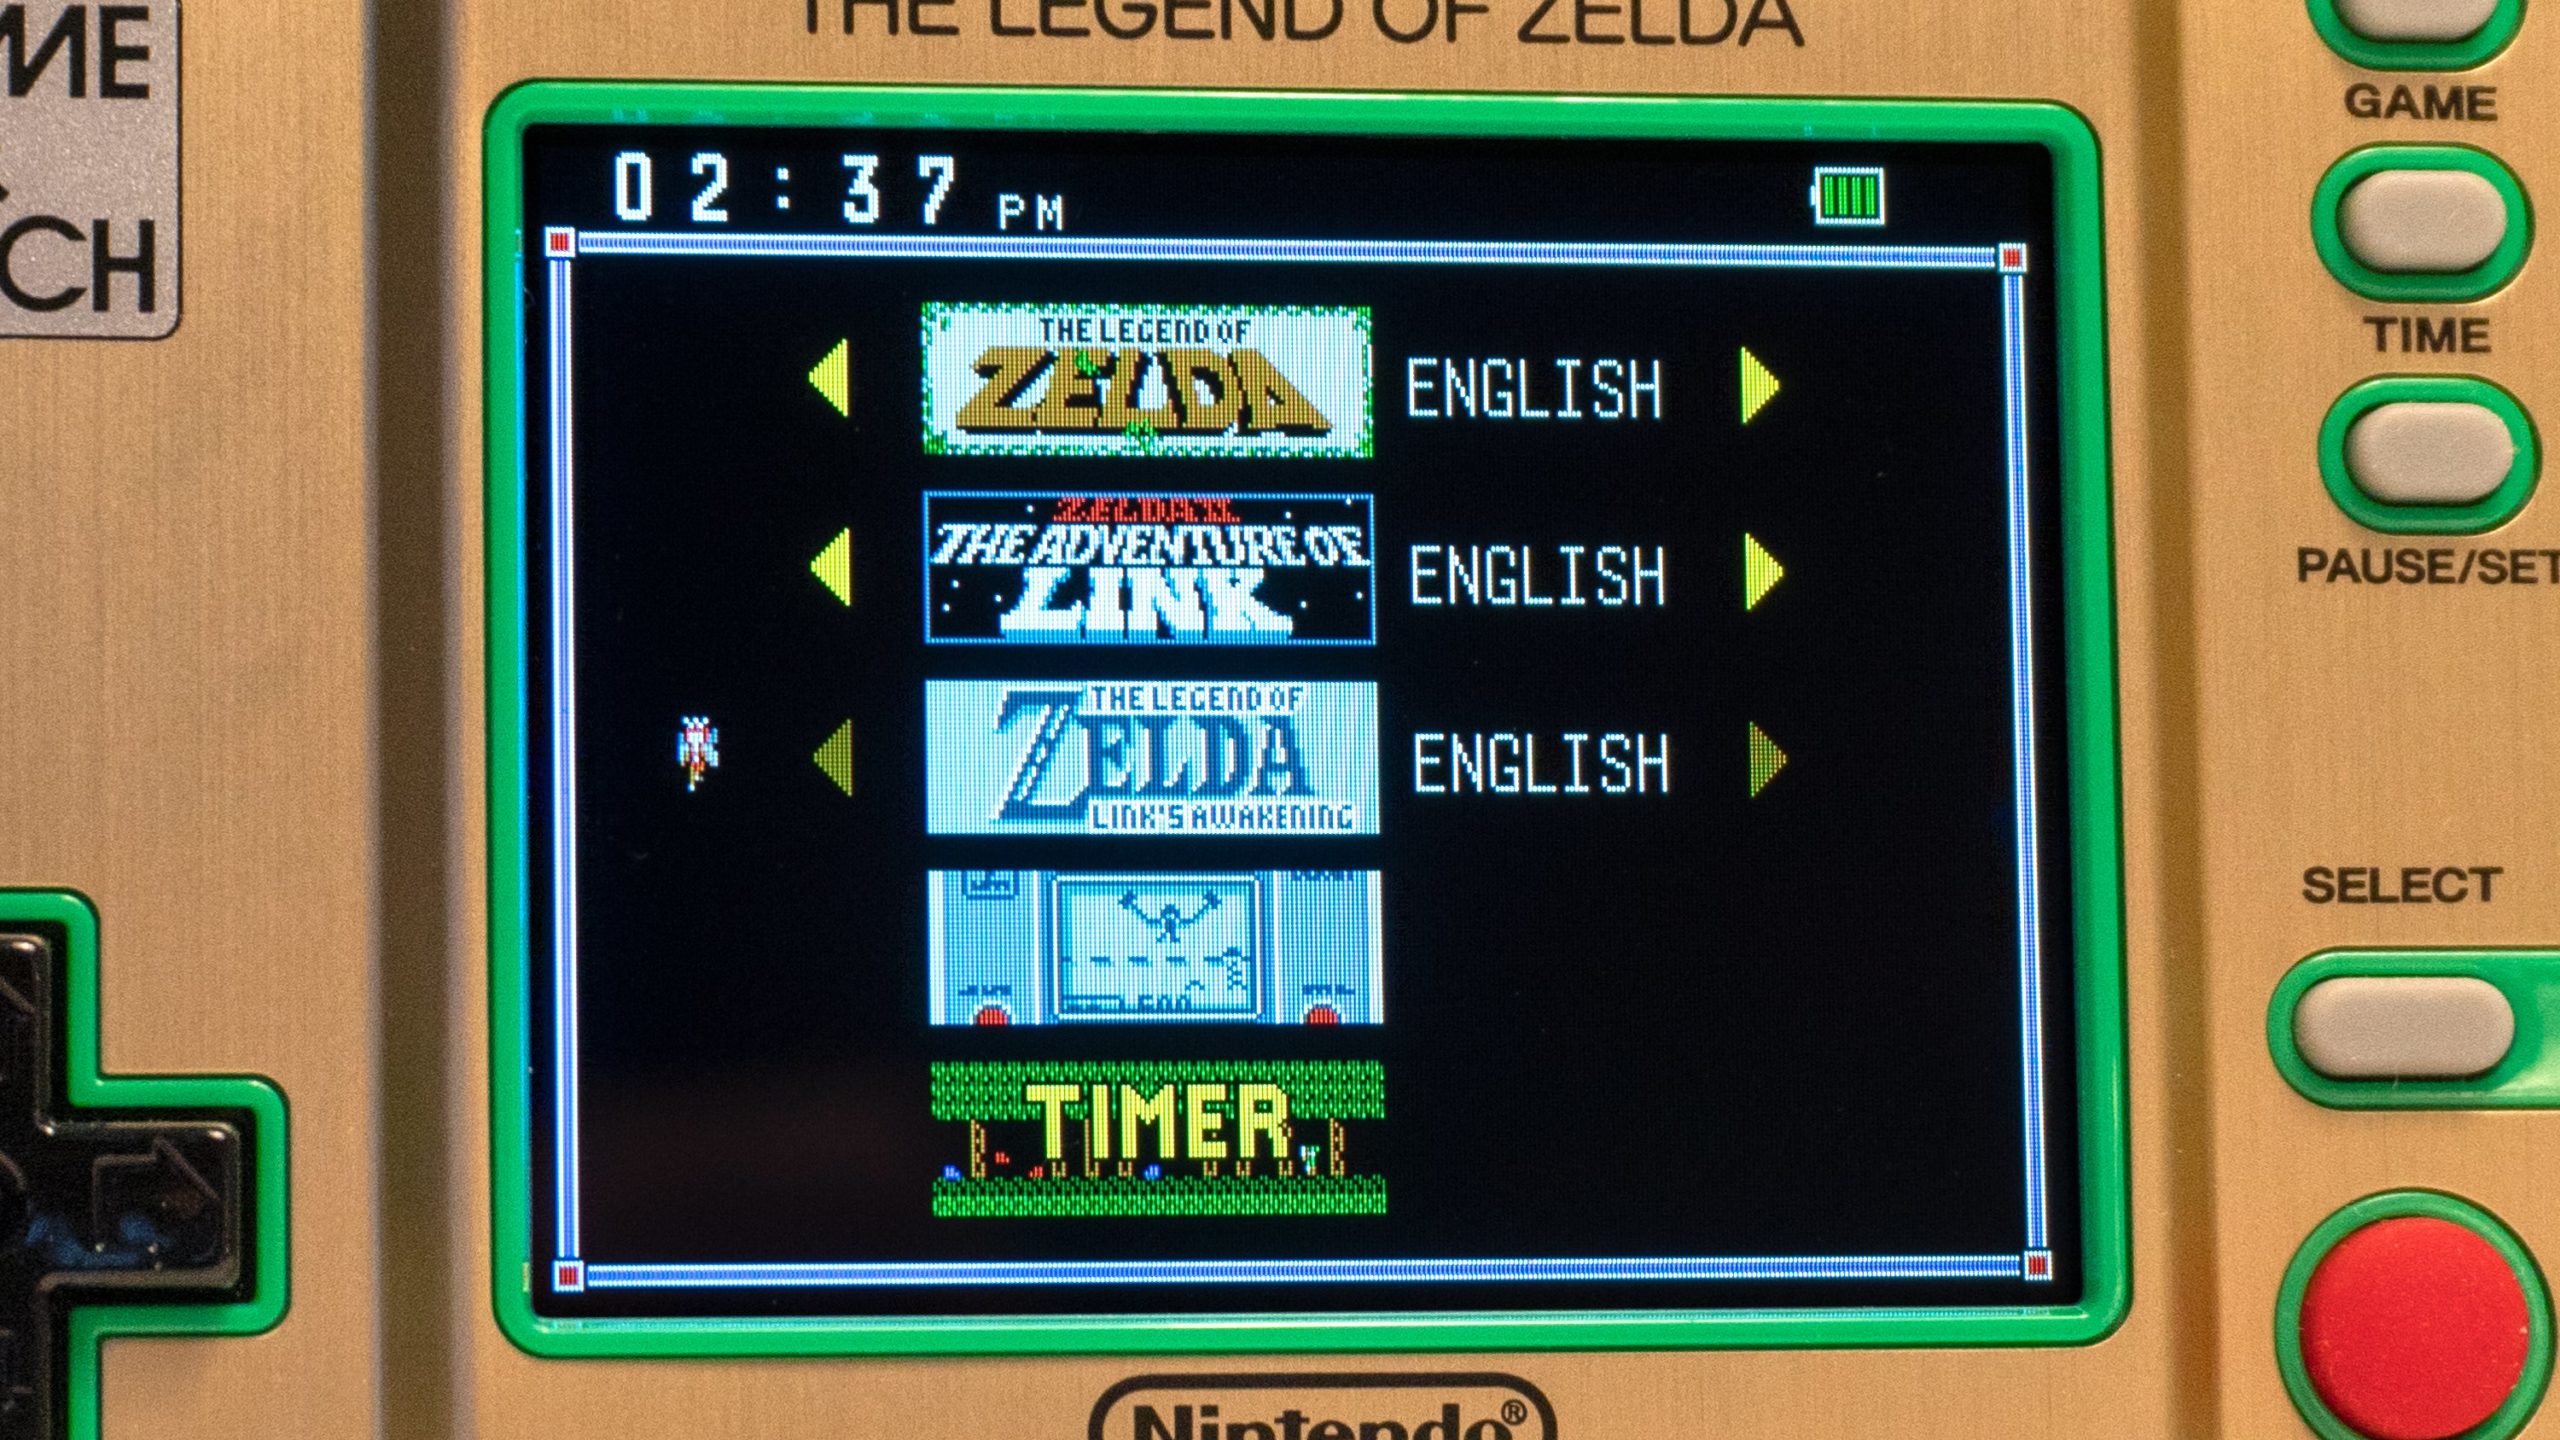 Three full The Legend of Zelda games are included in multiple languages, as well as a Game & Watch throwback title that's fun for about 35 seconds. (Photo: Andrew Liszewski - Gizmodo)